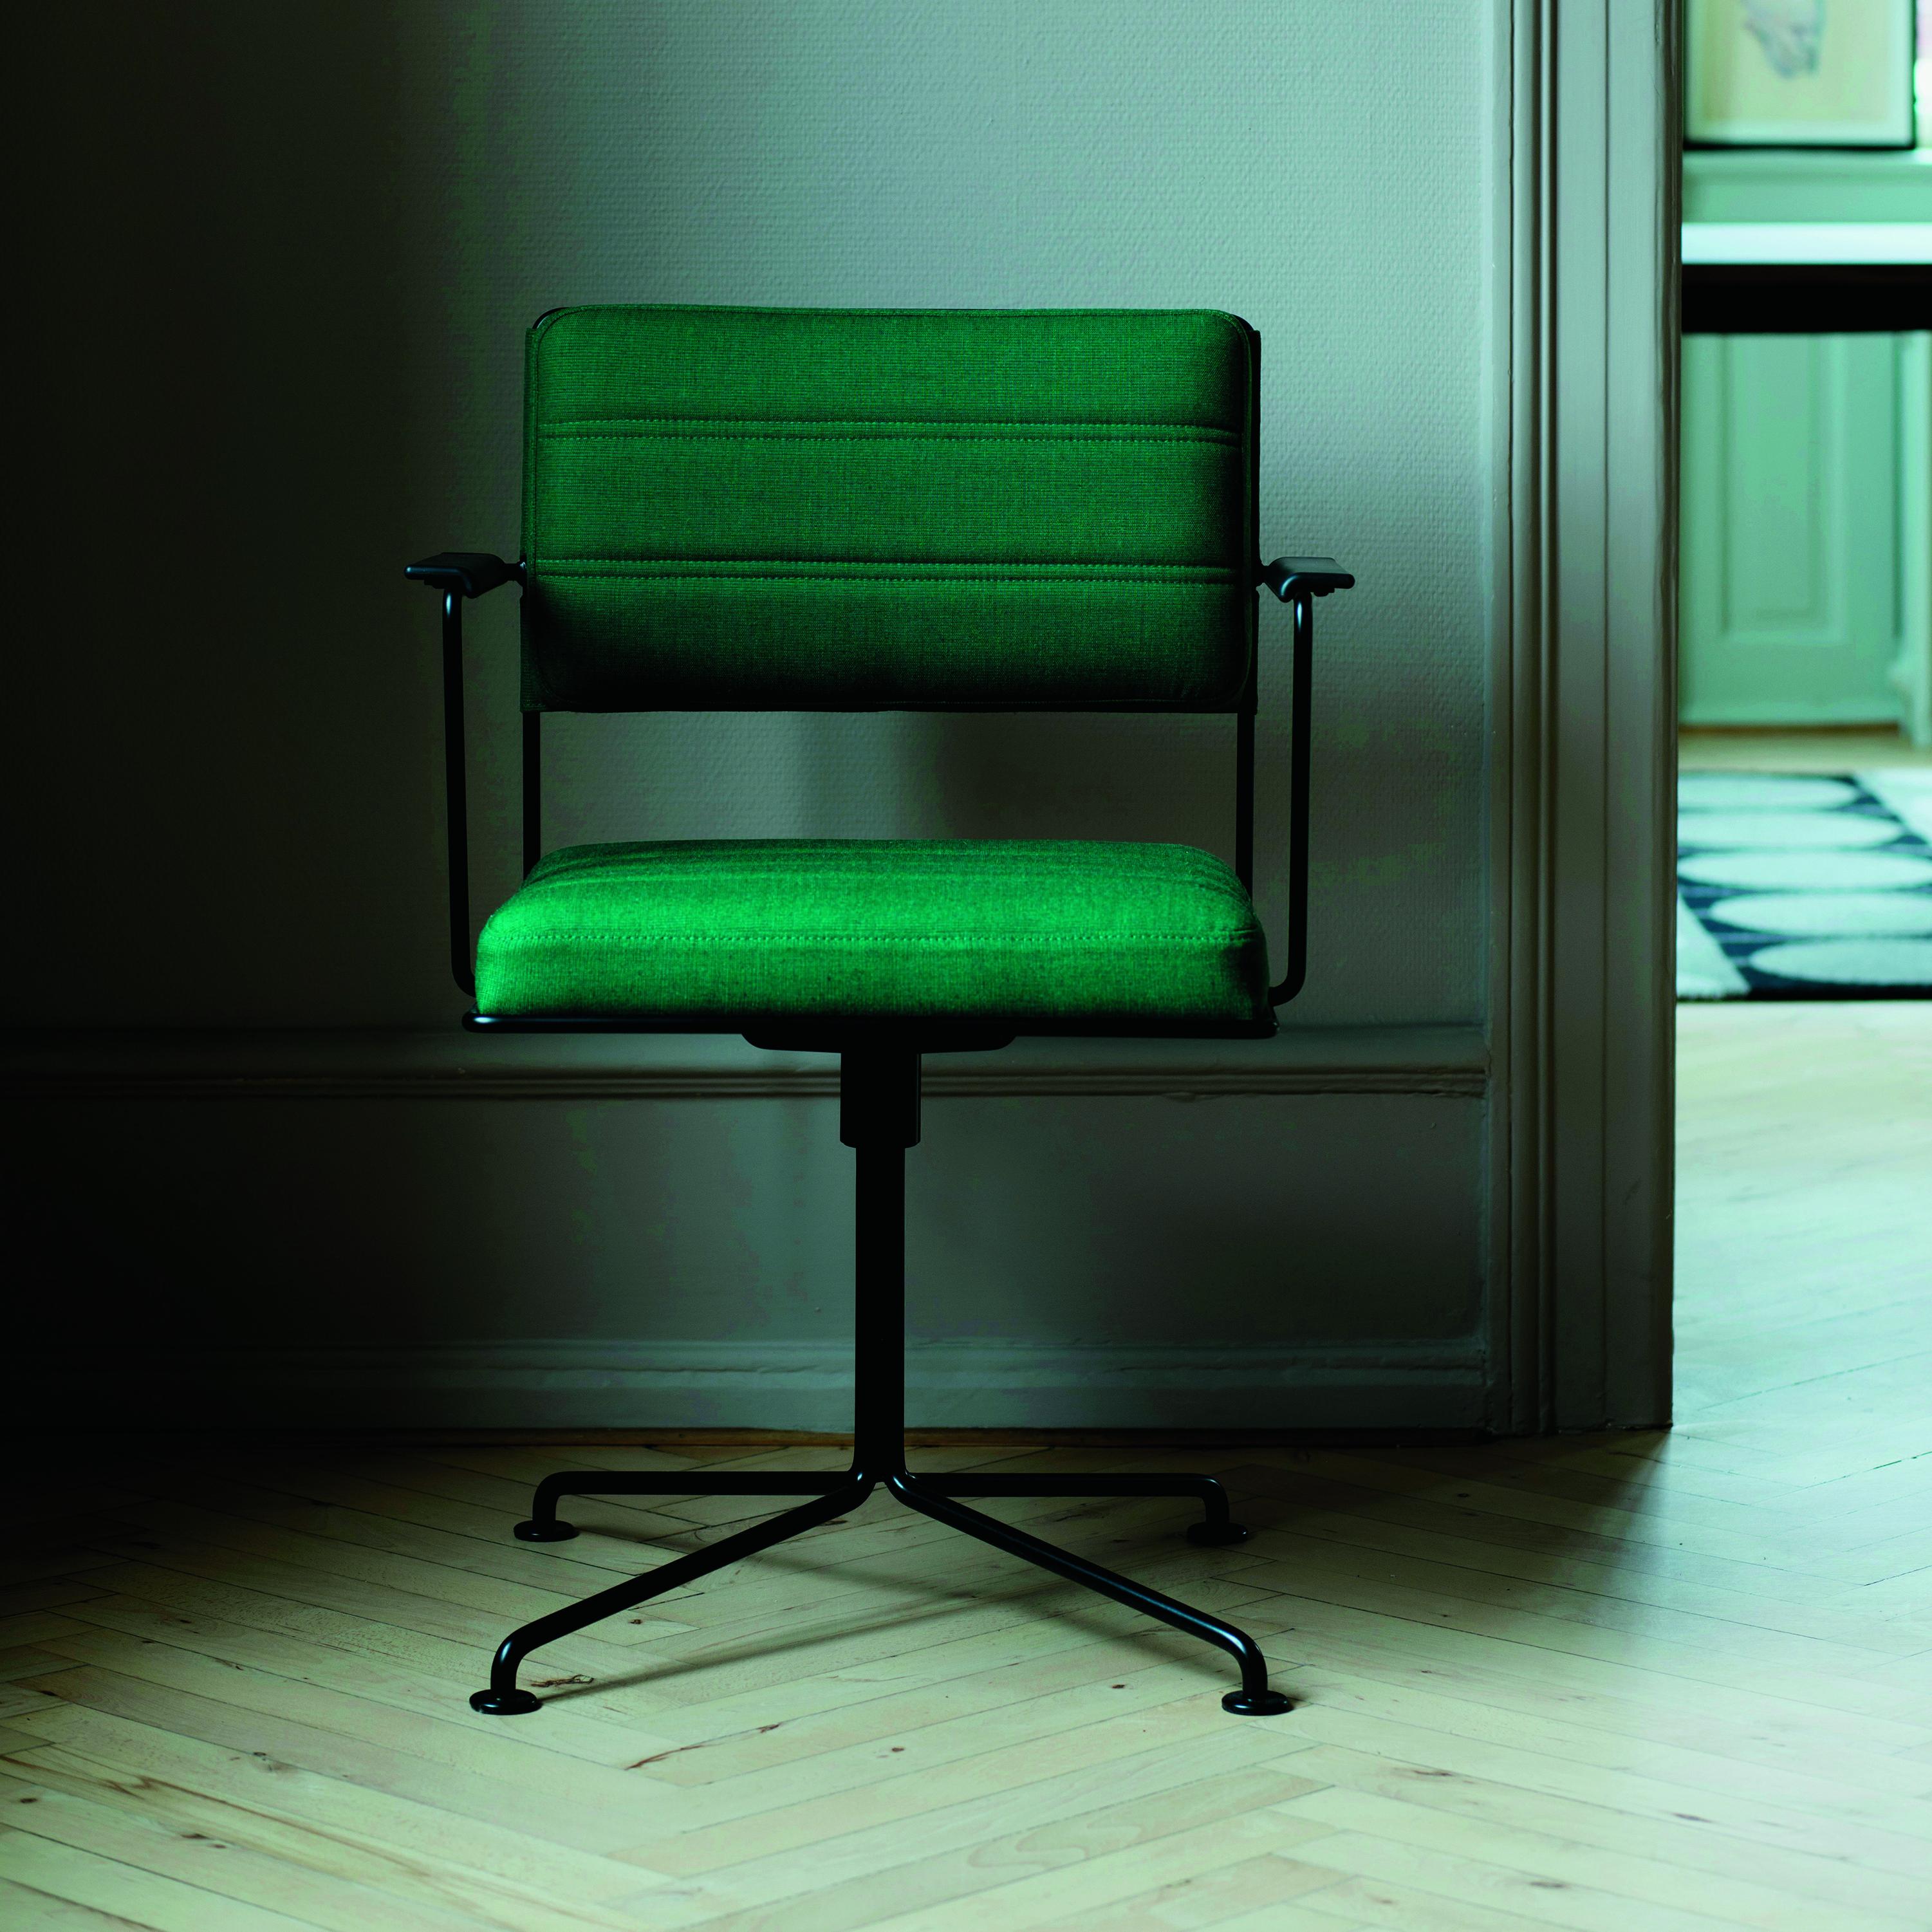 Henrik Tengler, HT 2012 Black Upholstery Time Chair by One Collection 1